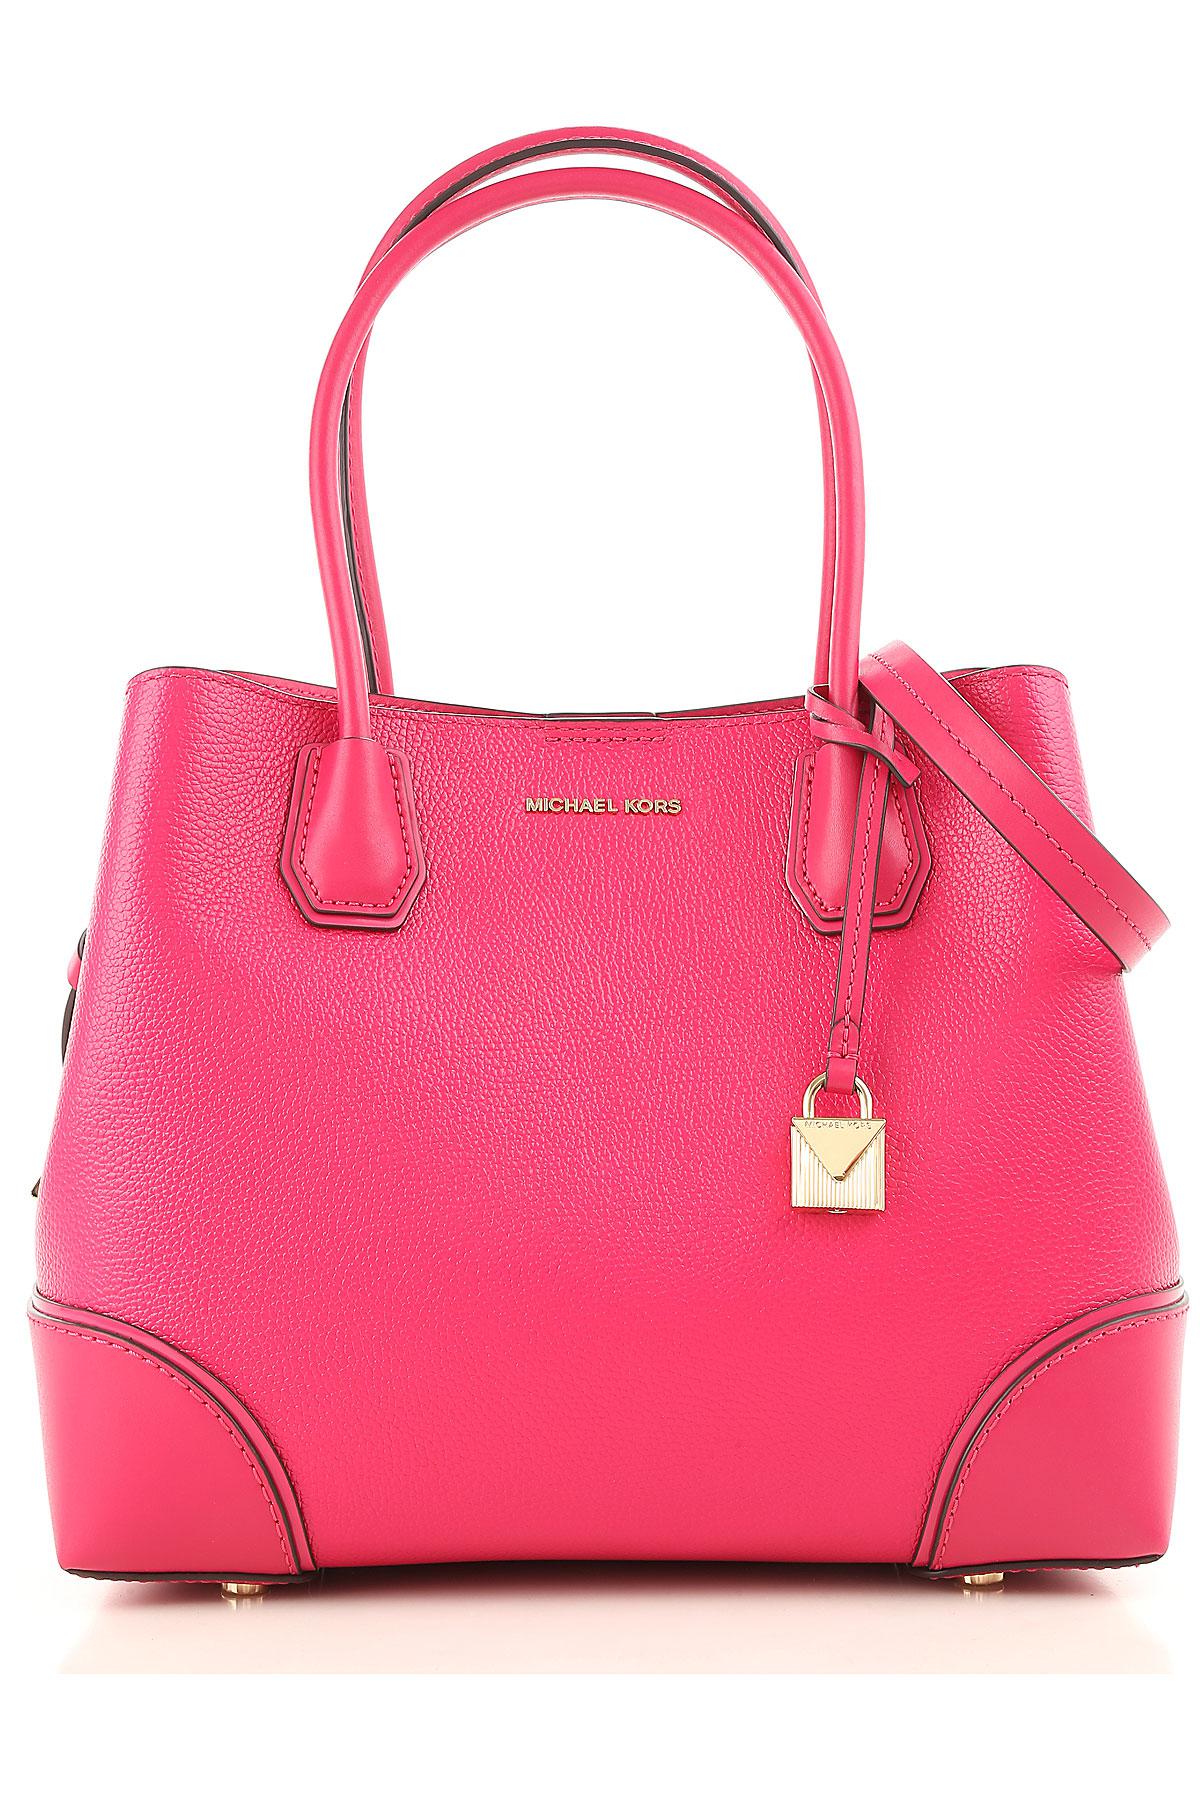 Michael Kors Leather Handbags in Ultra Pink (Pink) - Lyst